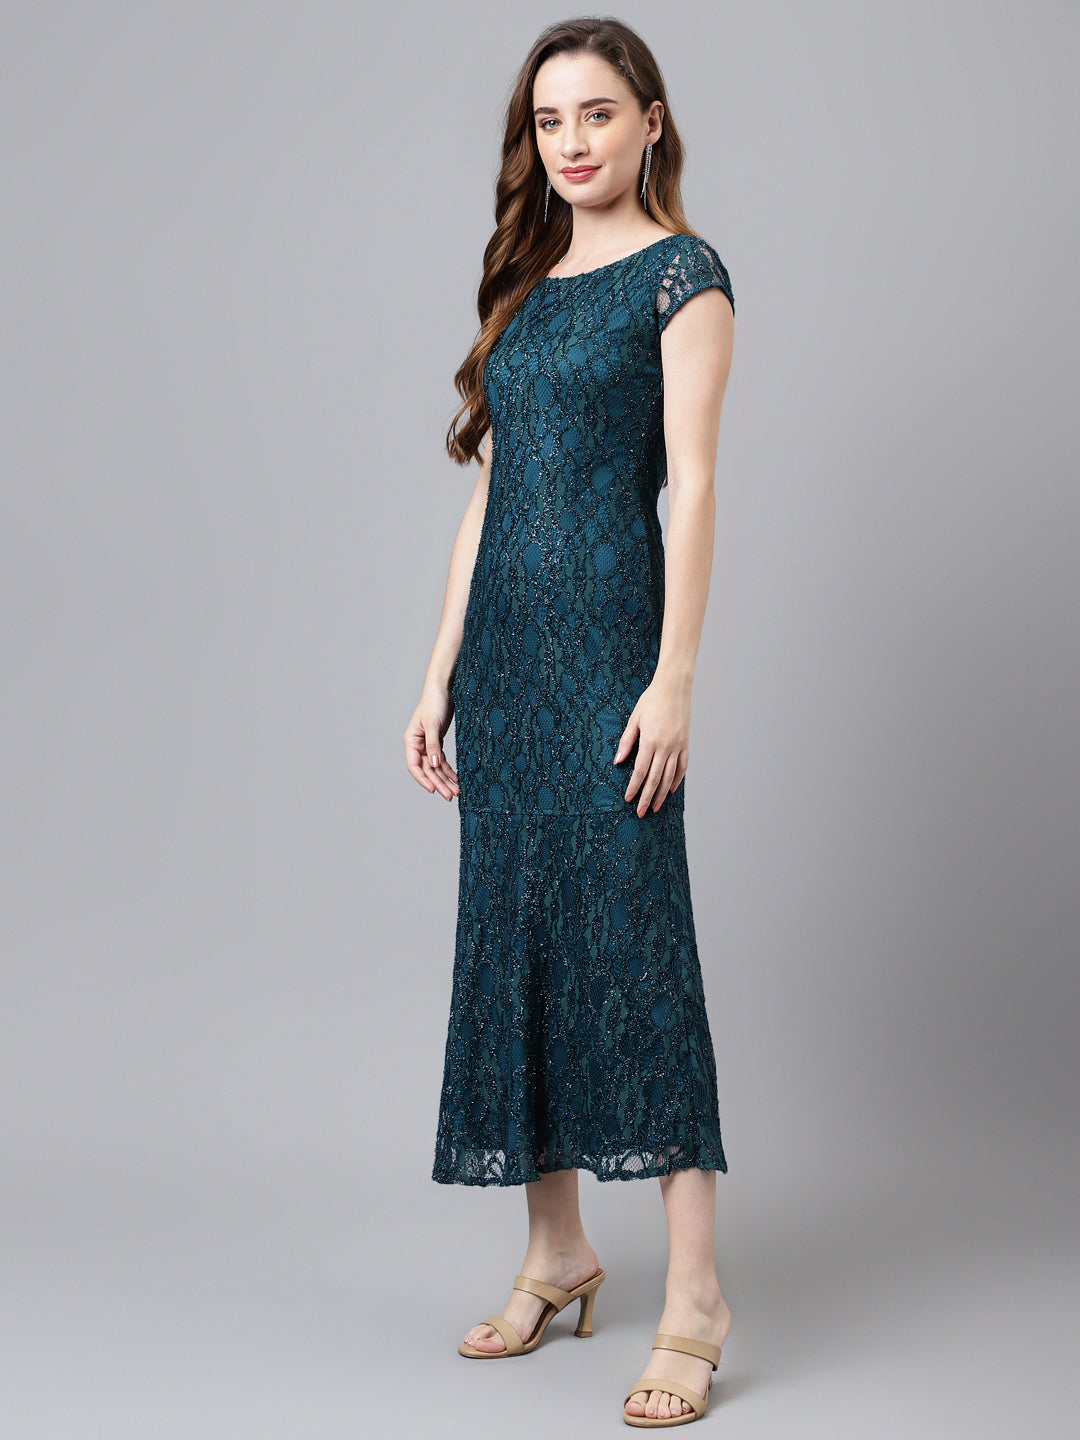 Greenforst Cap Sleeve Round Neck Solid Women Maxi Dress For Party